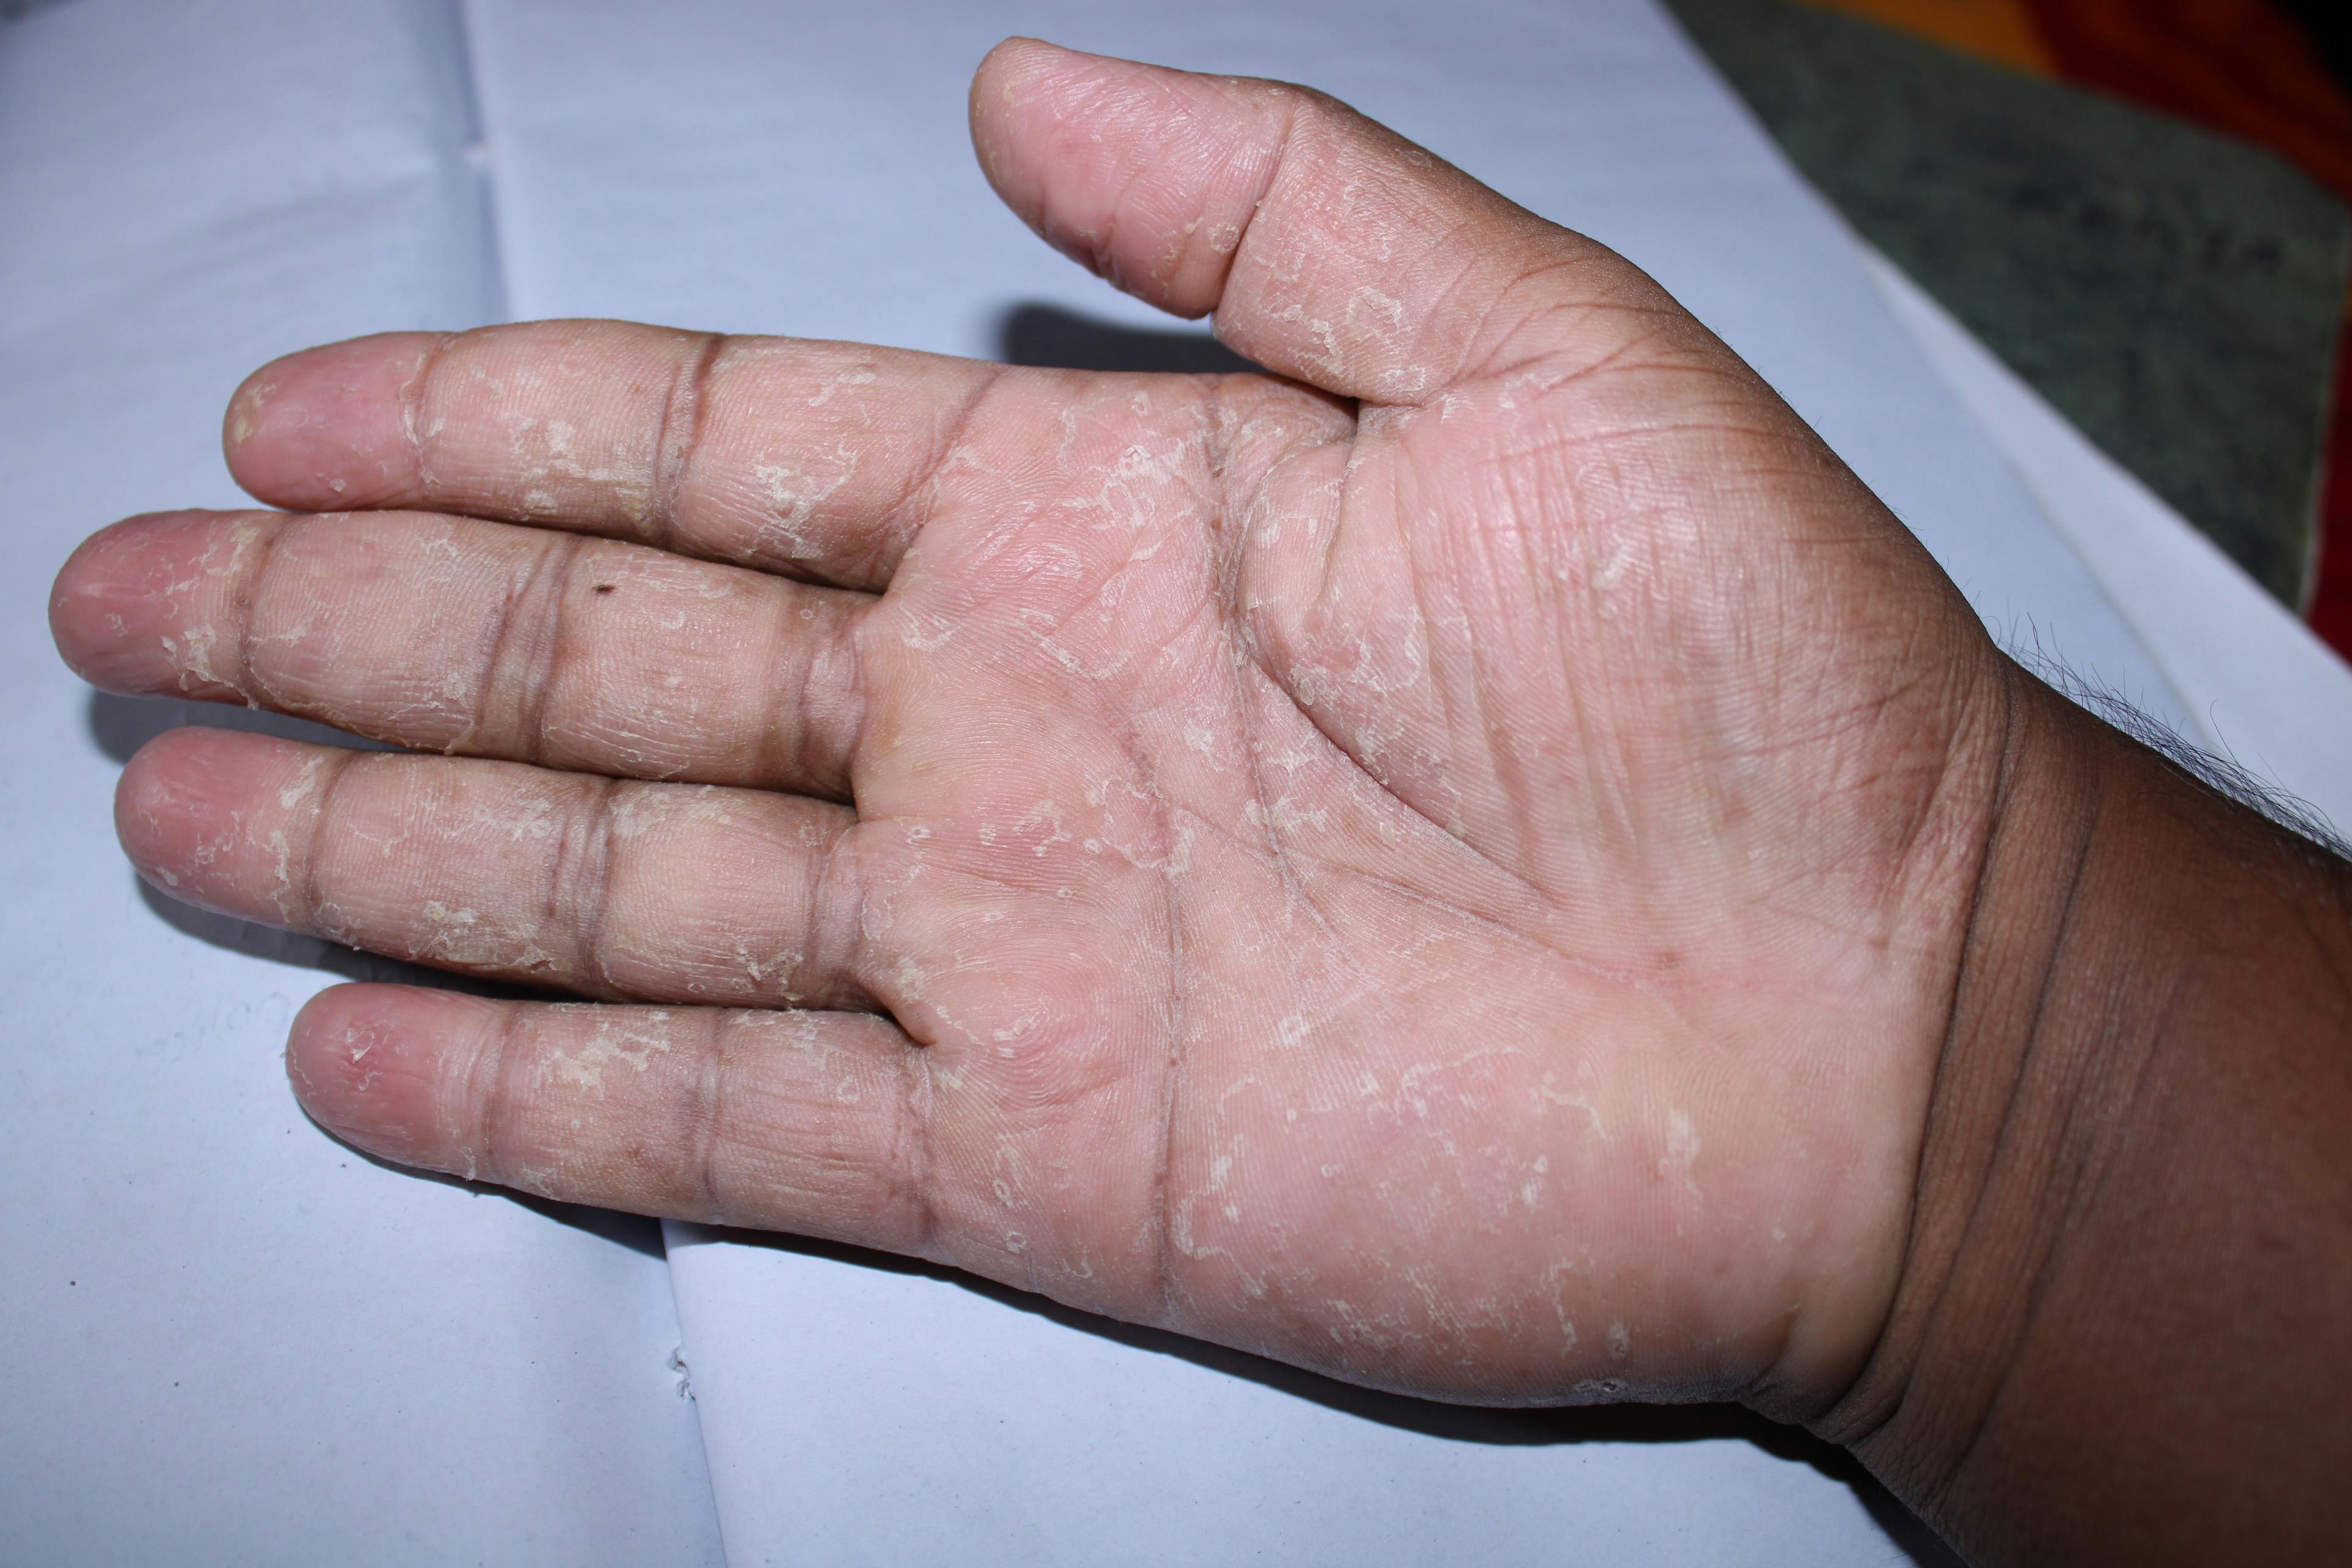 person of color with psoriasis on palm